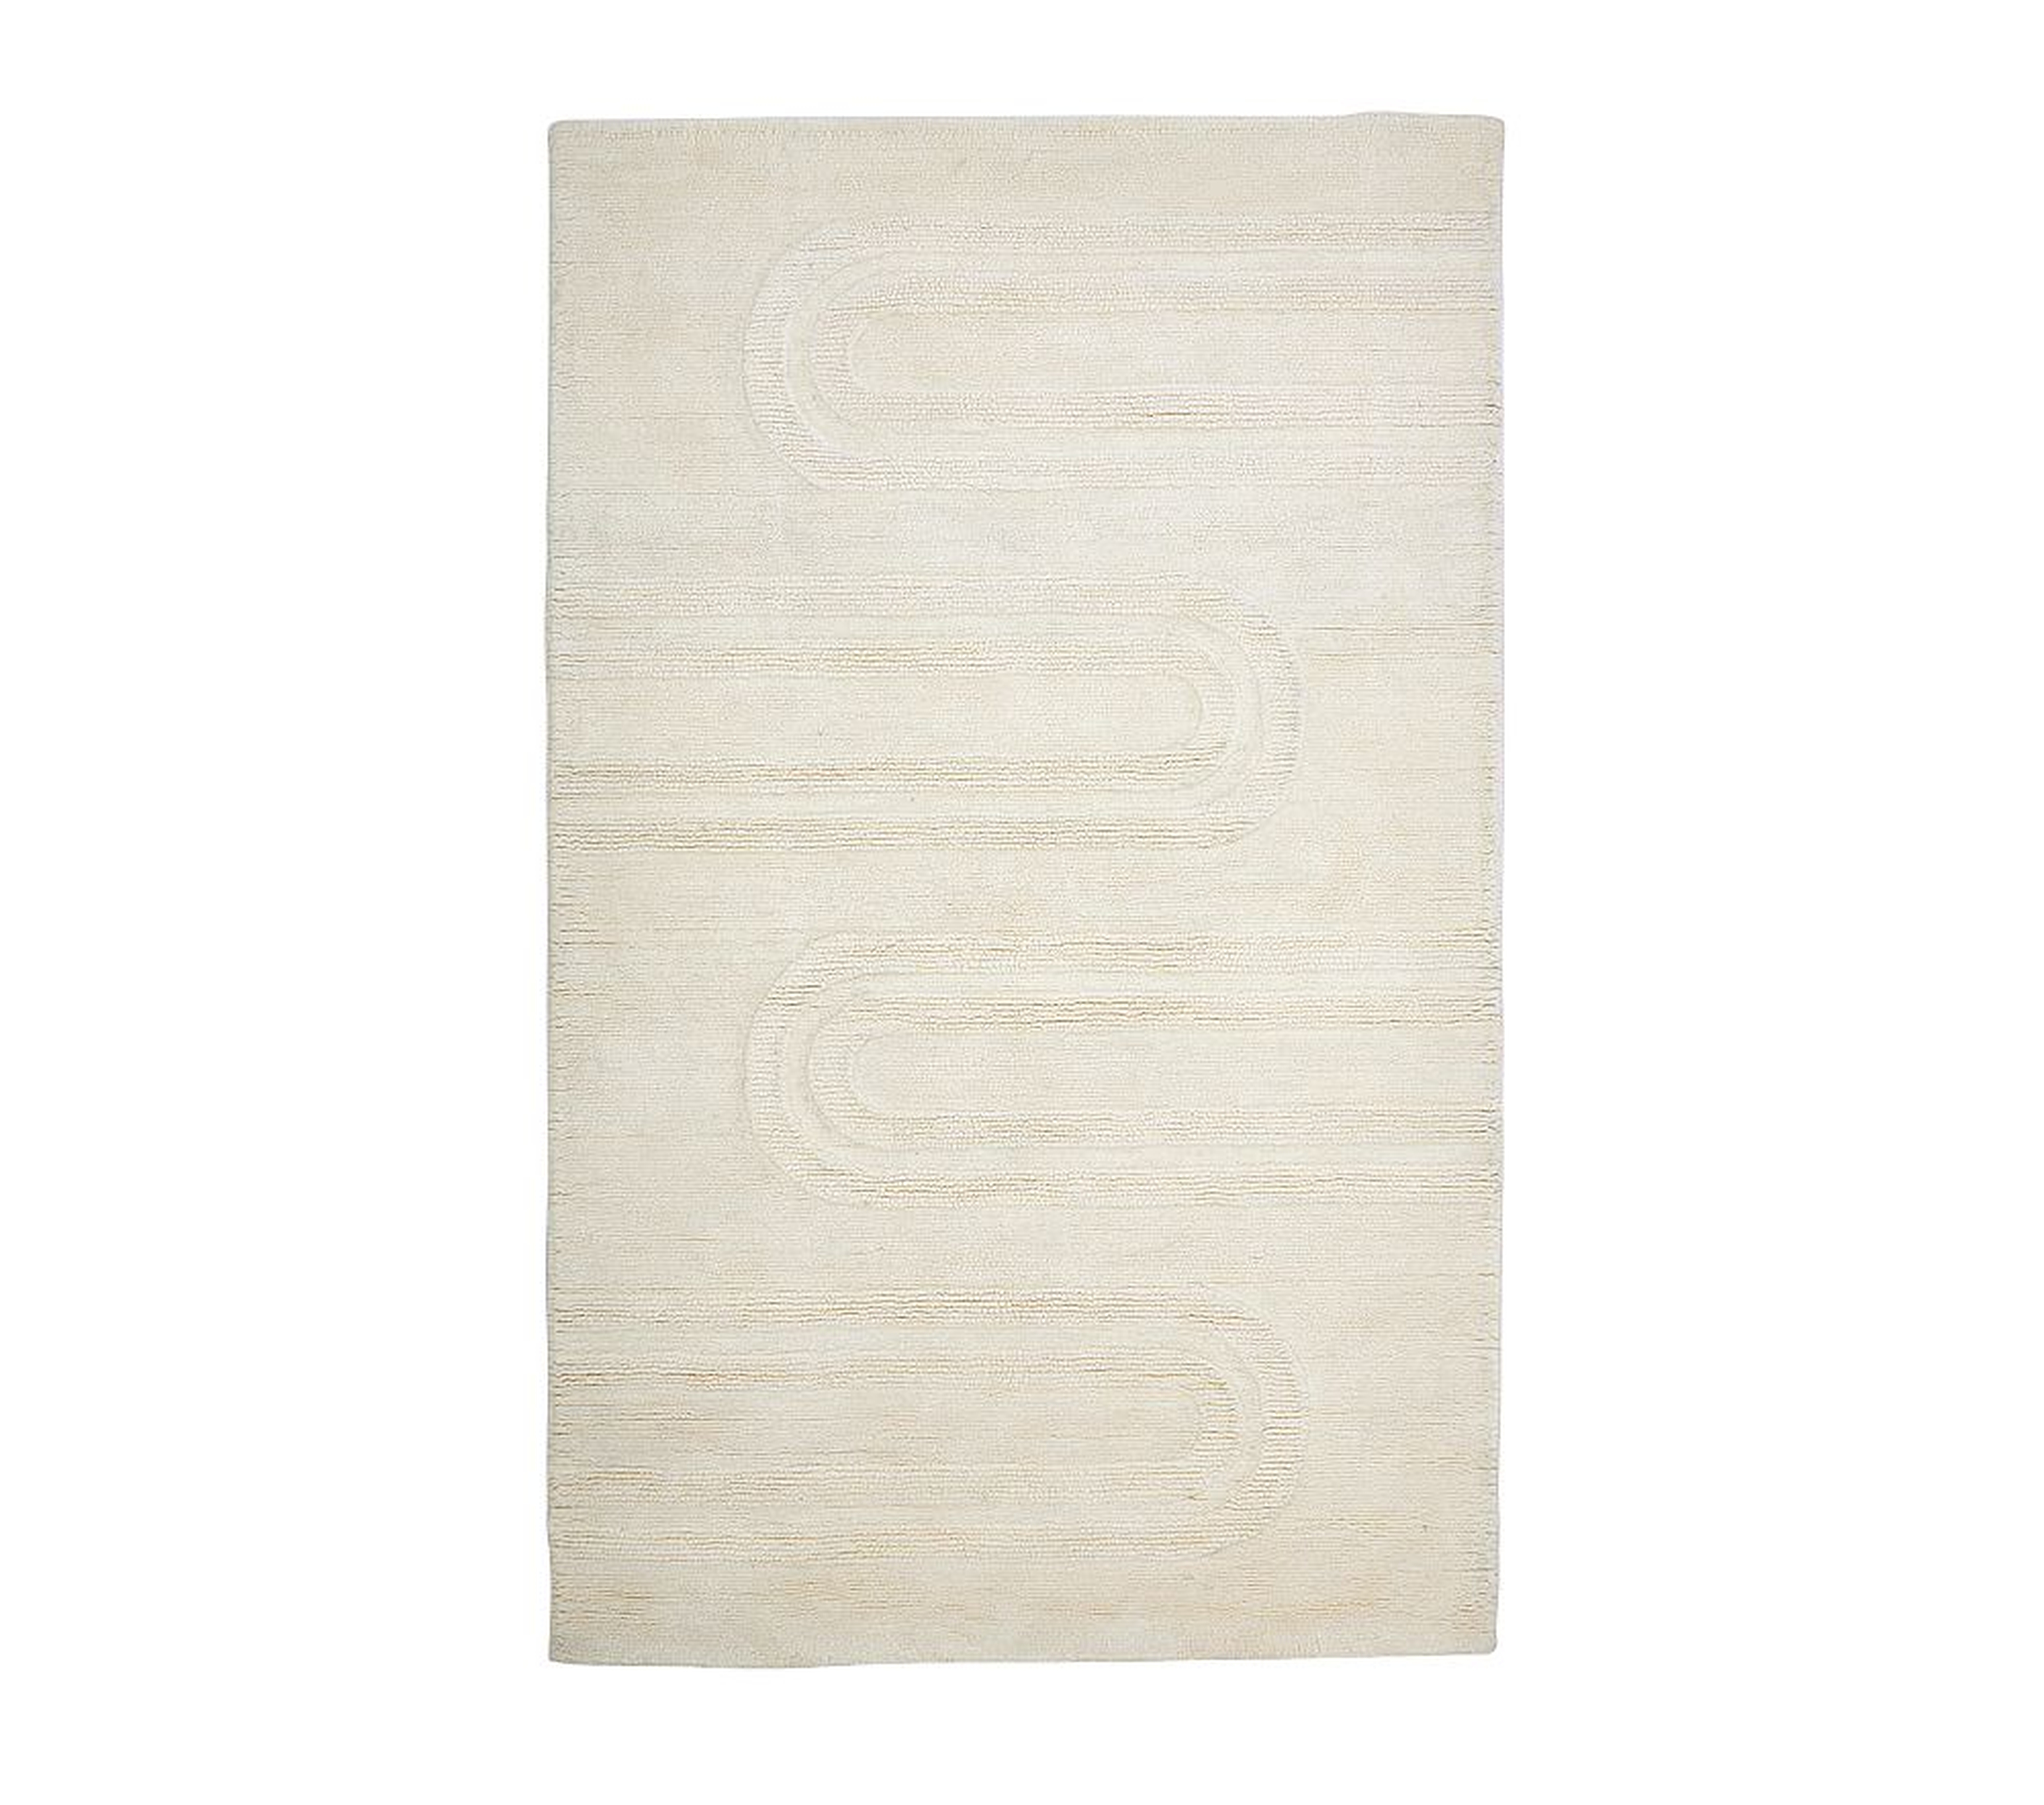 Carved Arches Natural Wool Rug, 7x10 Ft, Natural - Pottery Barn Kids